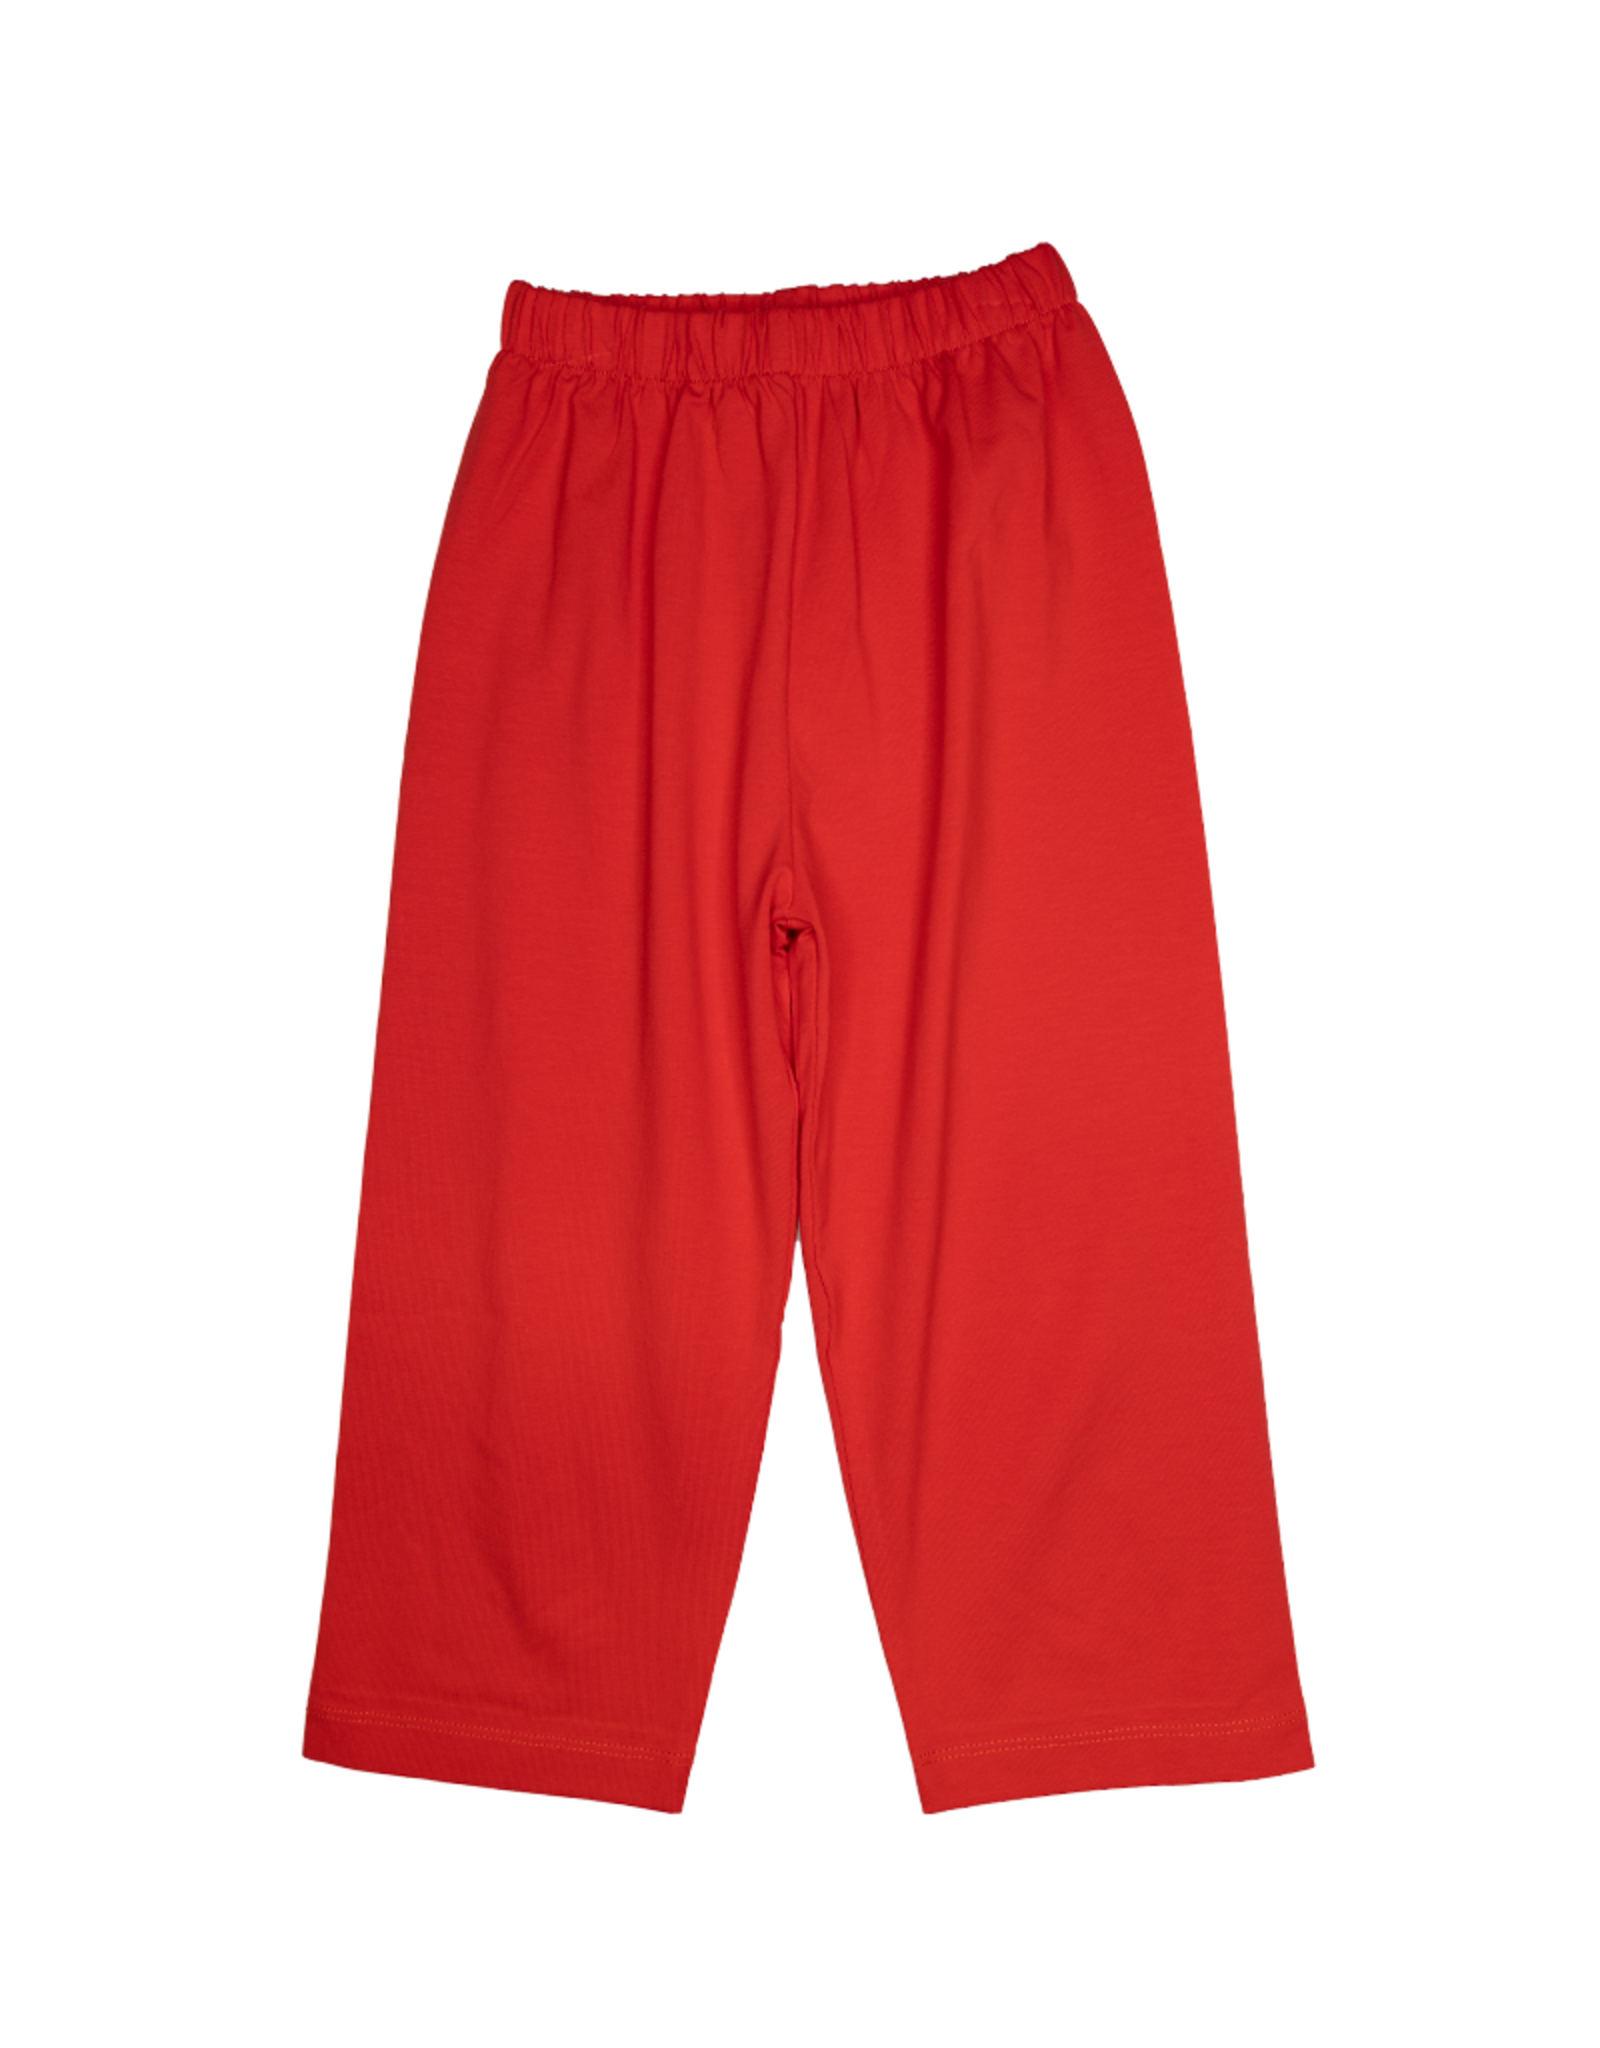 Millie Jay 545 Red Knit Pant